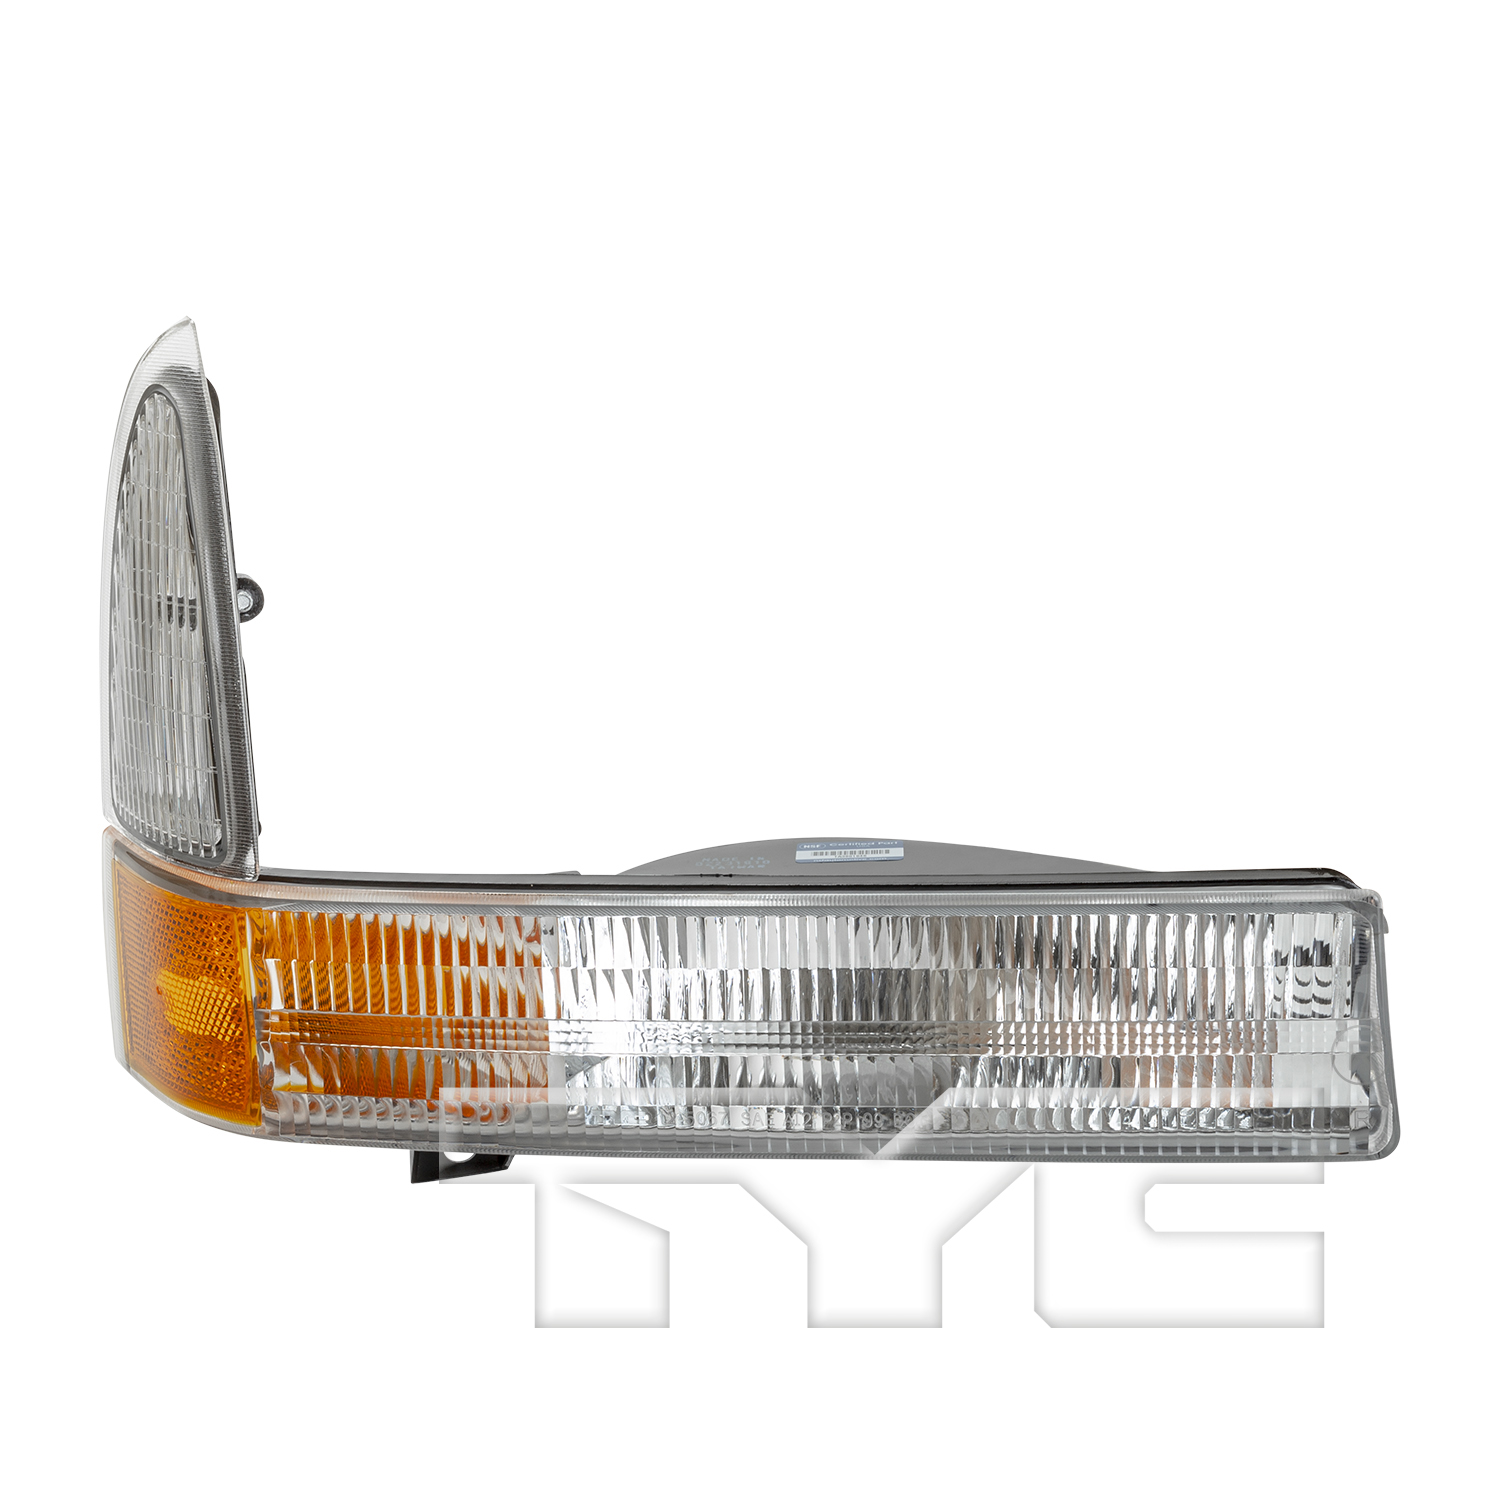 Aftermarket LAMPS for FORD - F-350 SUPER DUTY, F-350 SUPER DUTY,02-05,RT Parklamp assy